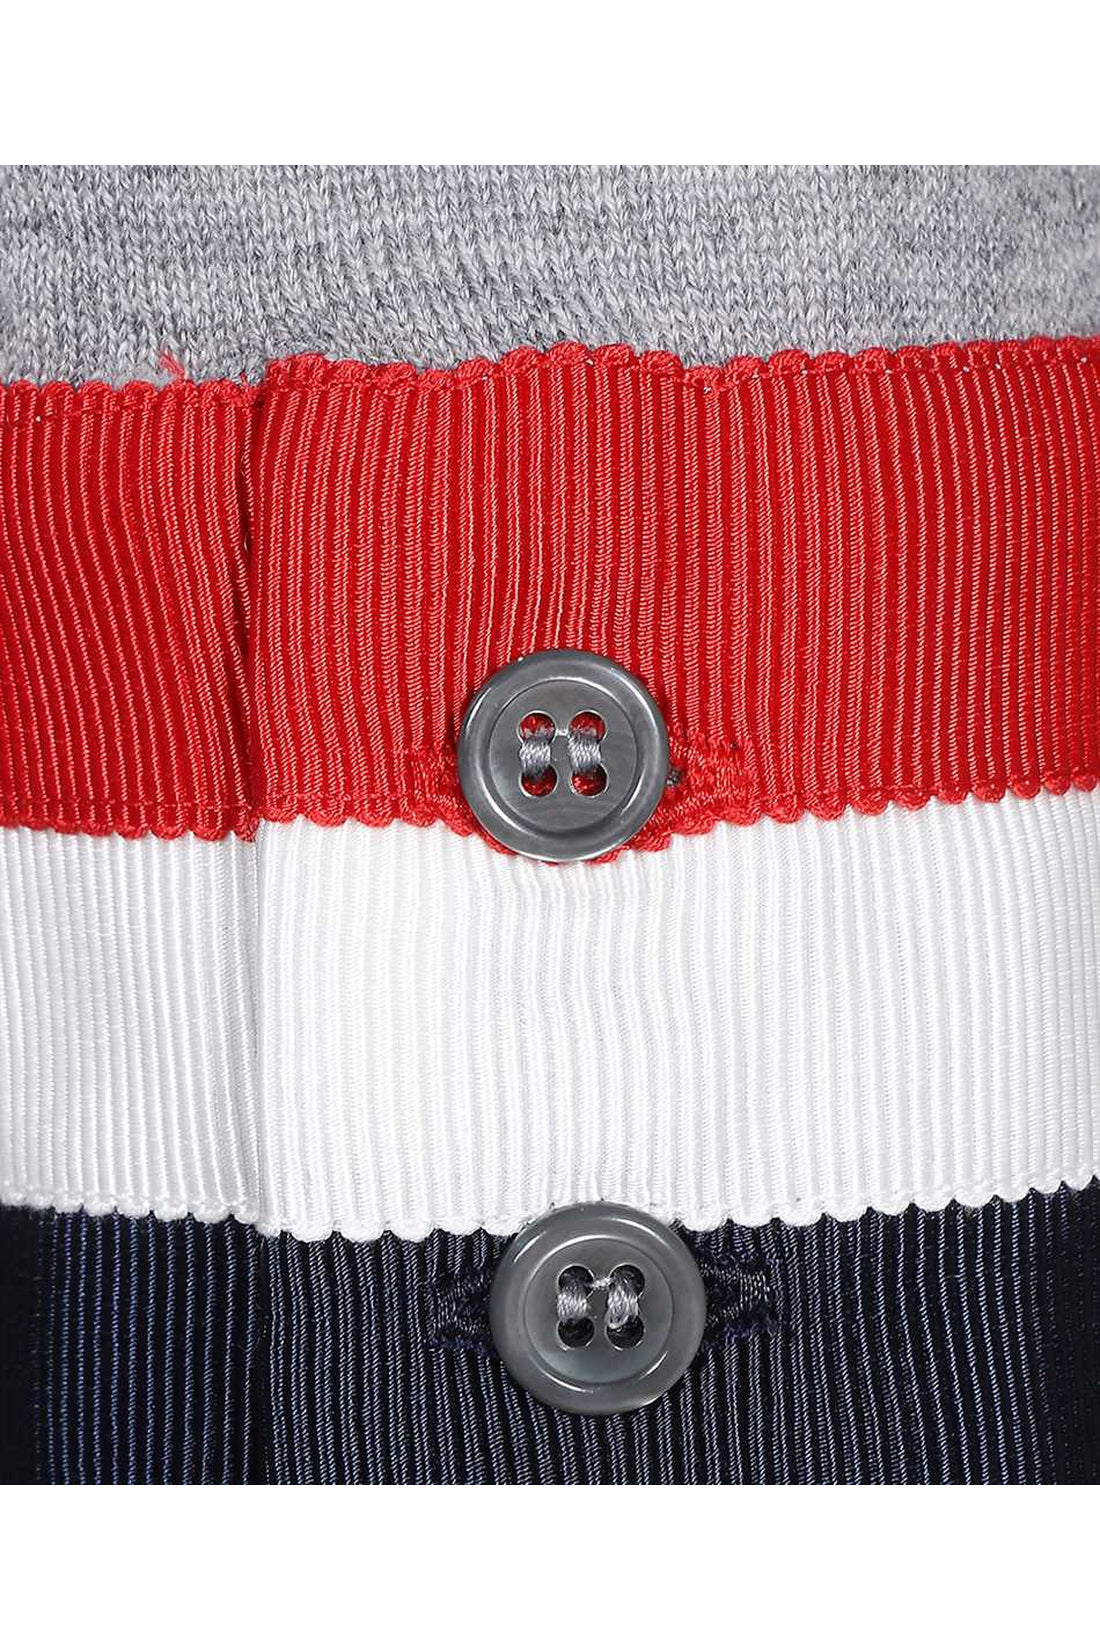 Thom Browne-OUTLET-SALE-Wool crew-neck sweater-ARCHIVIST